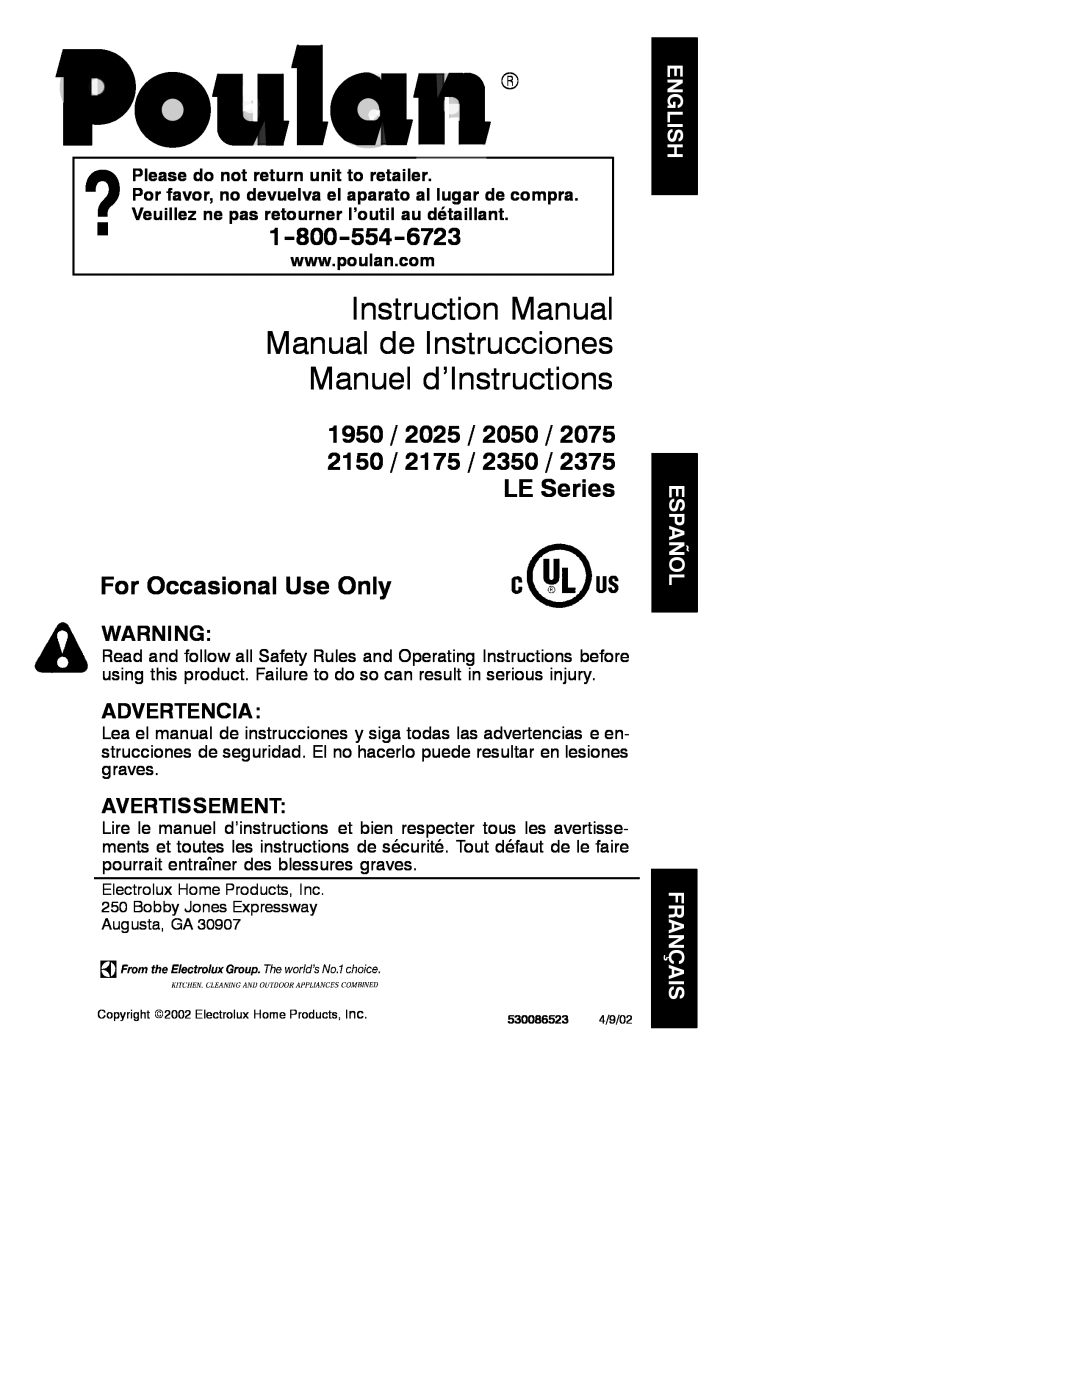 Poulan 2050, 2075, 1975, 2055 instruction manual Manuel d’Instructions, For Occasional Use Only, Advertencia, Avertissement 